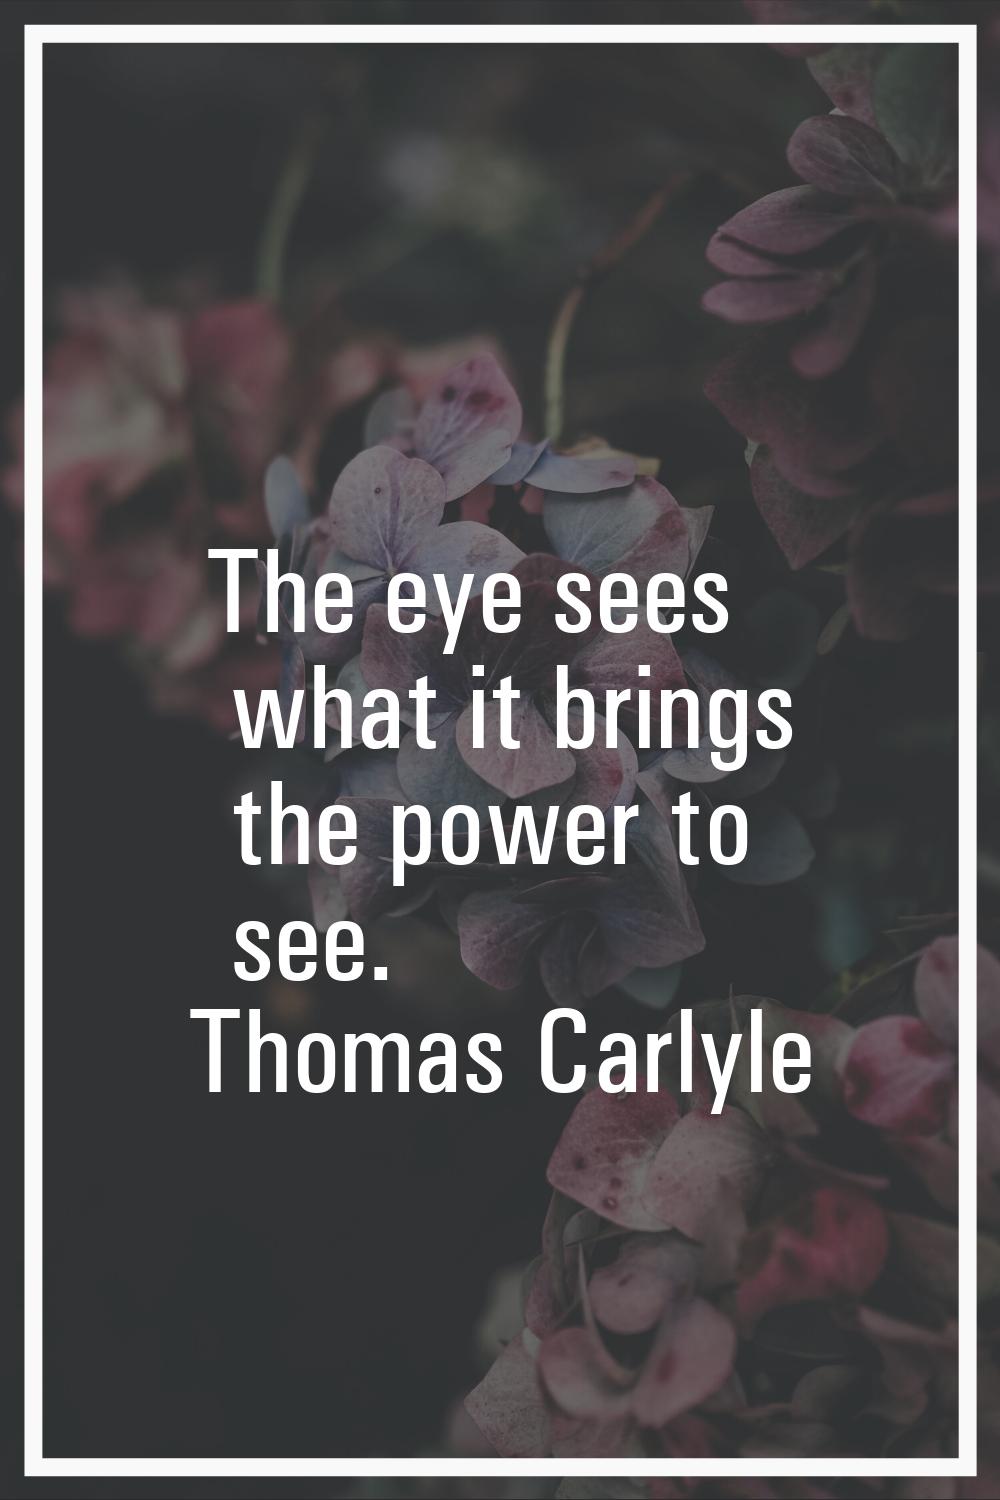 The eye sees what it brings the power to see.